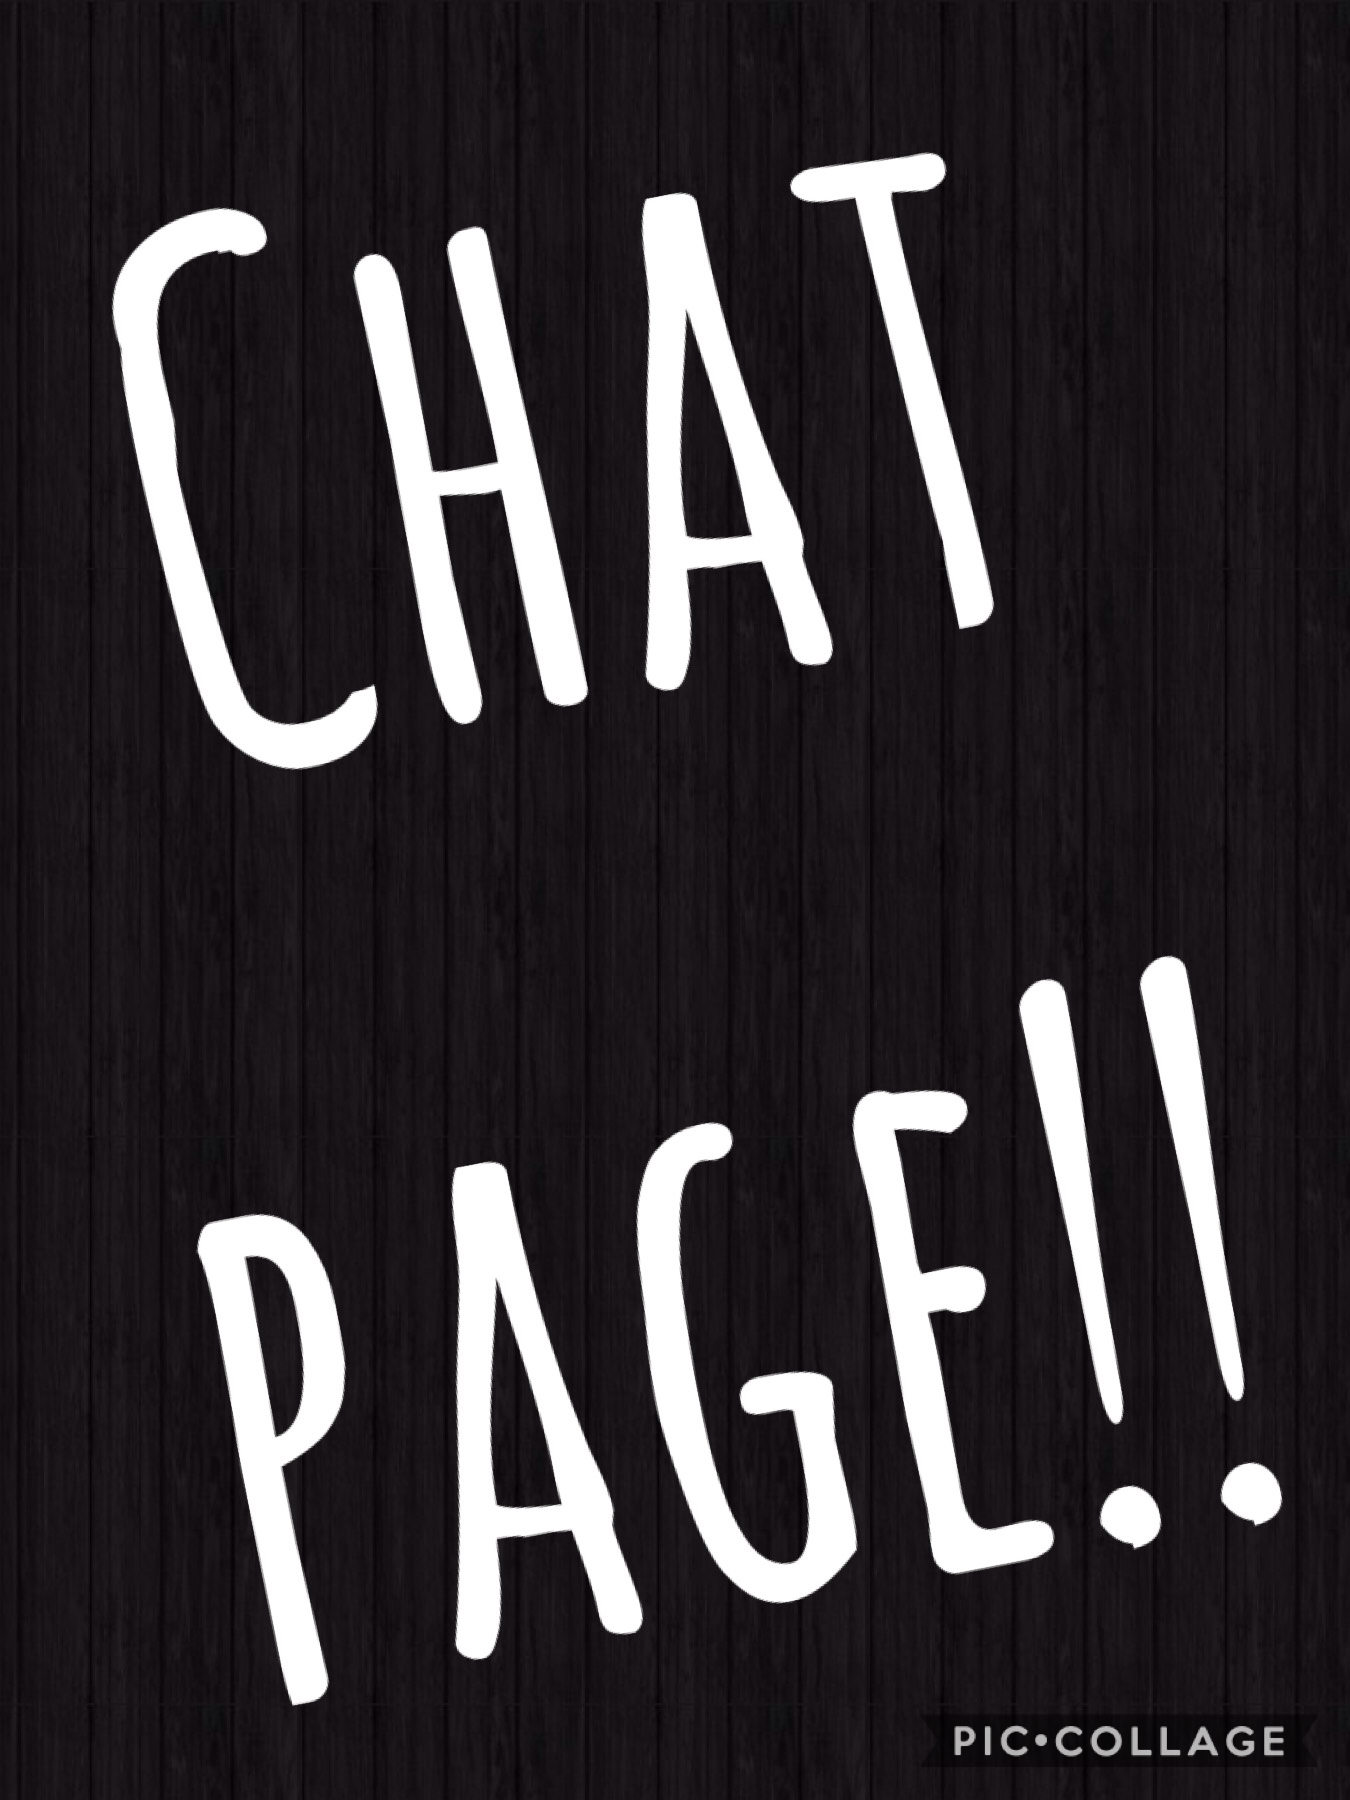 Chat page!!